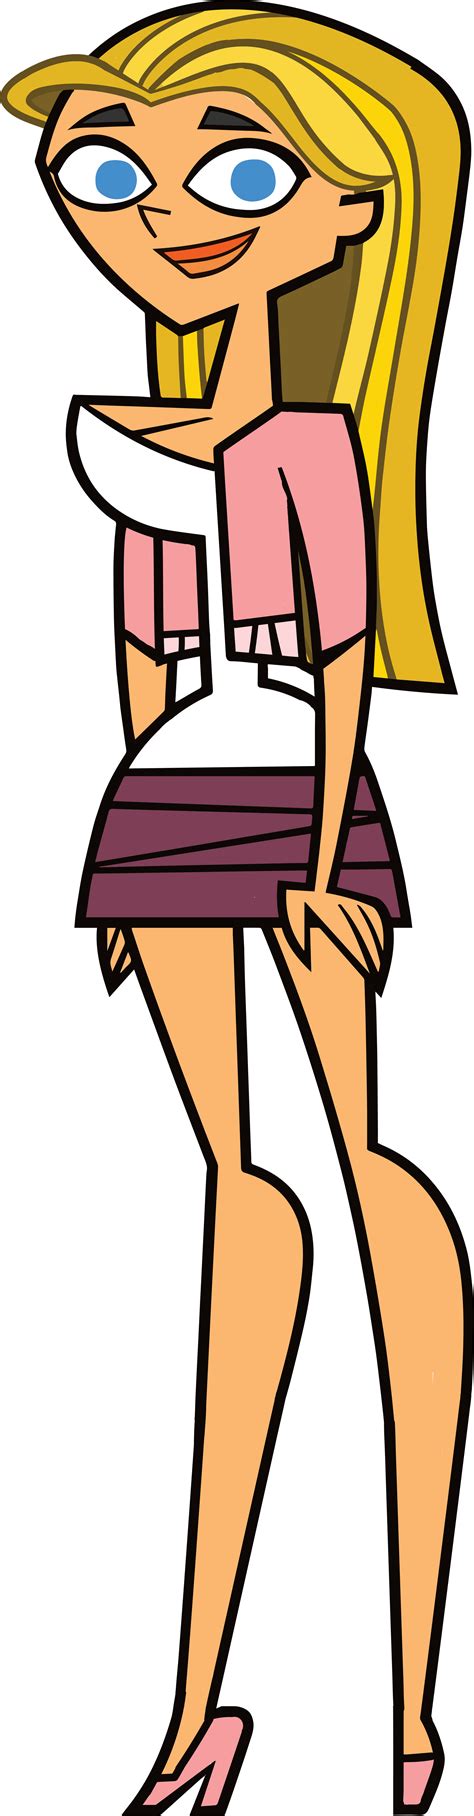 Tdi lindsey. A subreddit to talk about the Canadian cartoon franchise, Total Drama, its spin offs (DramaRama & the Ridonculous Race) as well as any related works such as Disventure Camp. Remember that posts related to the 2023 reboot and/or Disventure seasons must be spoiler tagged. 